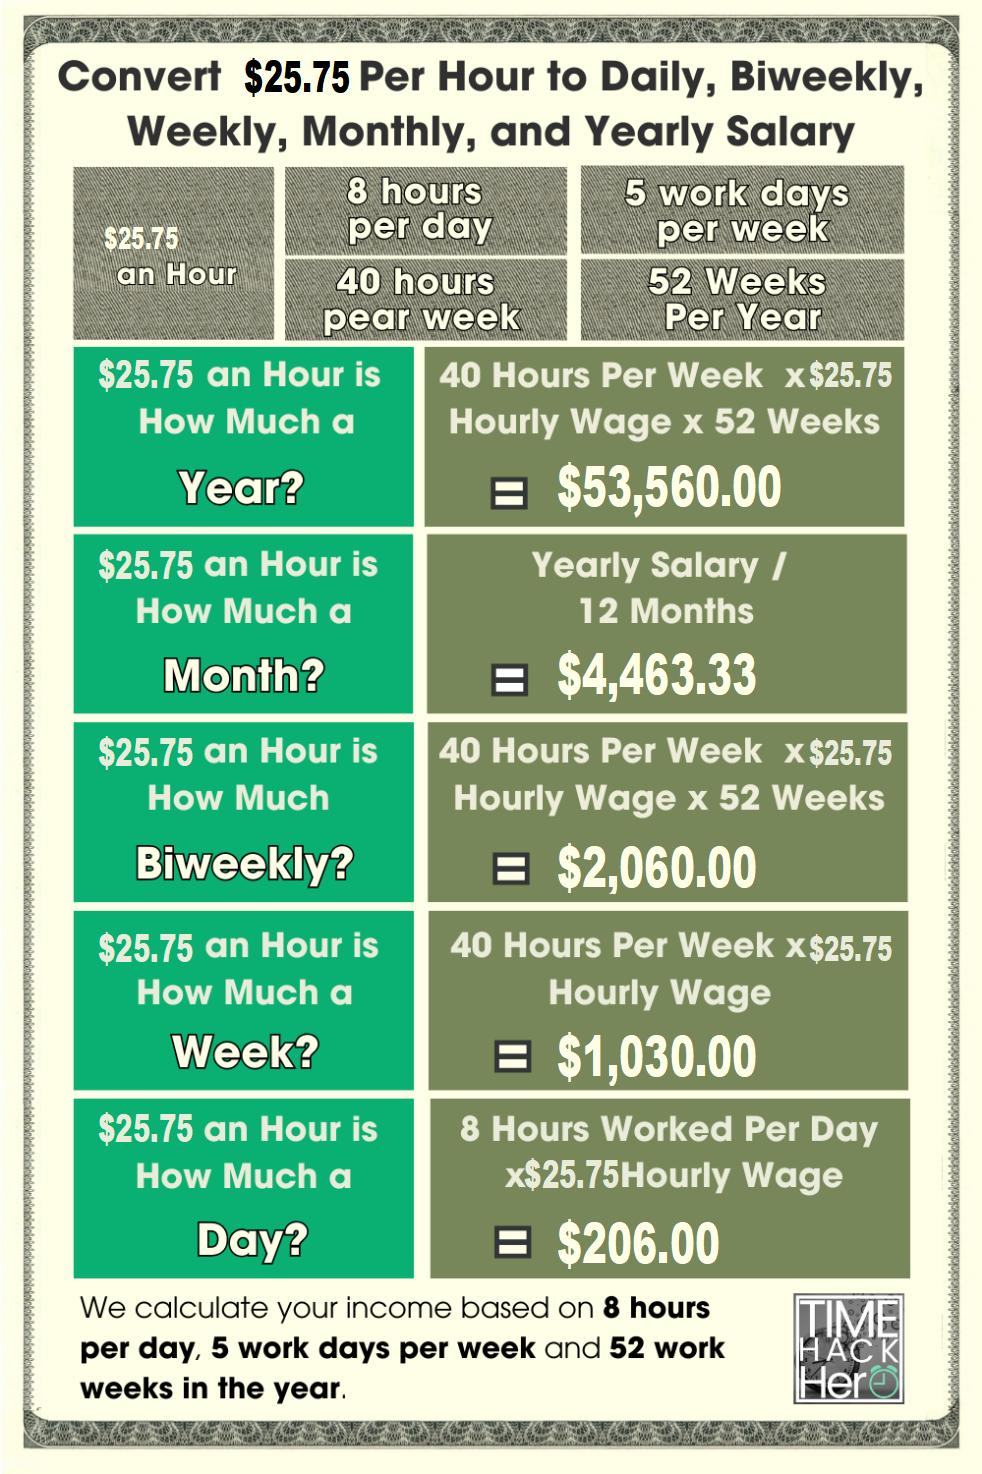 Convert $25.75 Per Hour to Weekly, Monthly, and Yearly Salary